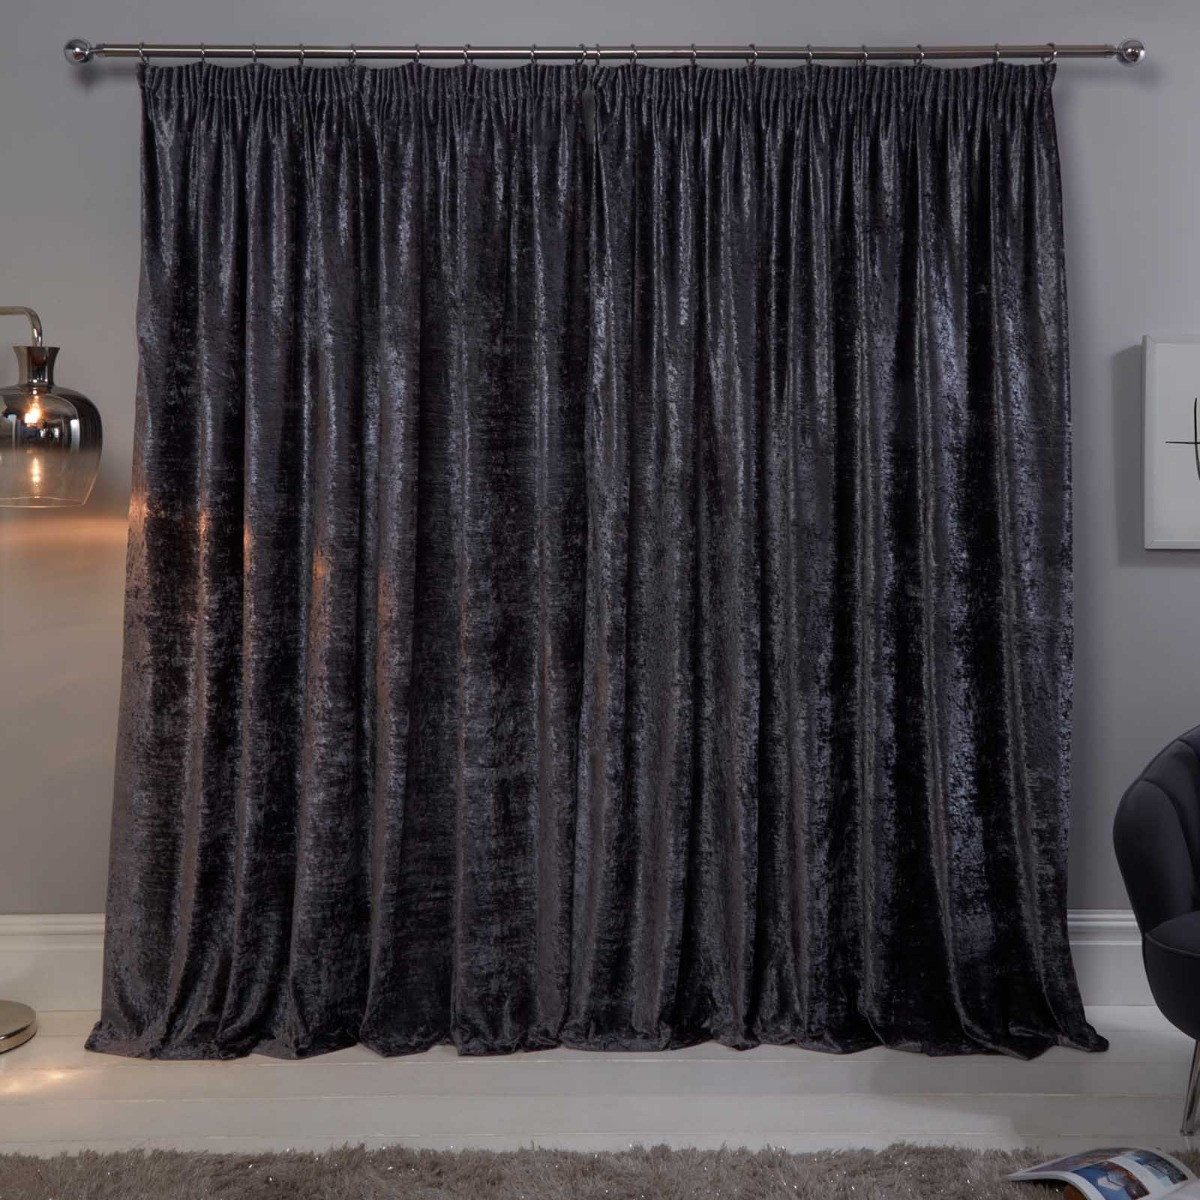 Sienna Crushed Velvet Pencil Pleat Curtains - Charcoal>